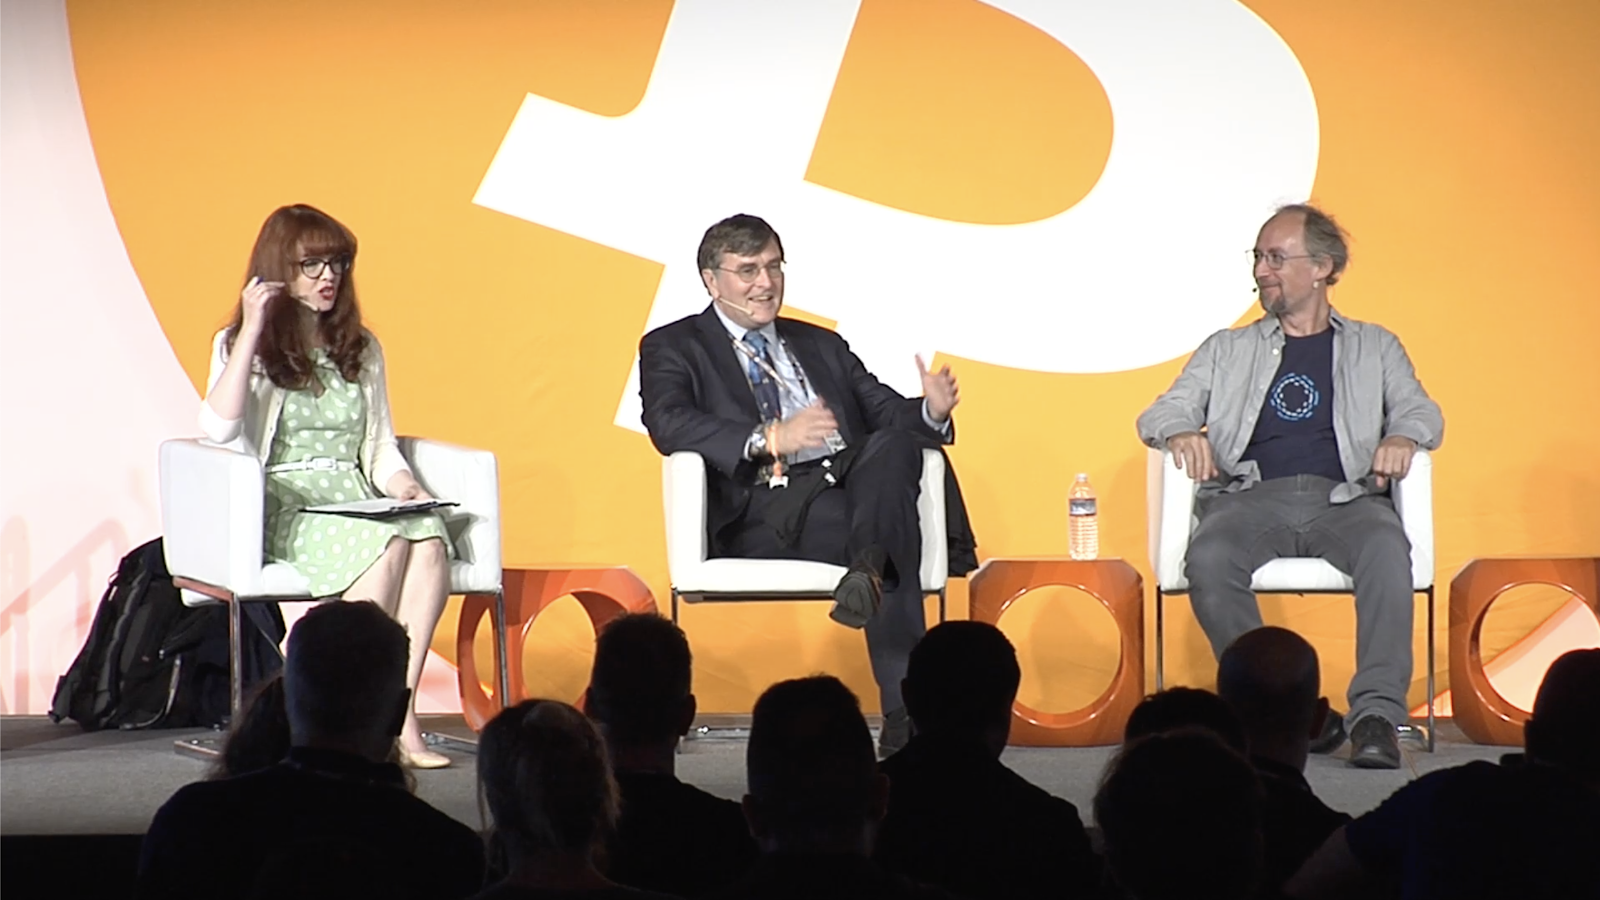 At Bitcoin 2019, Scientists Cited In White Paper Weigh In On The Future